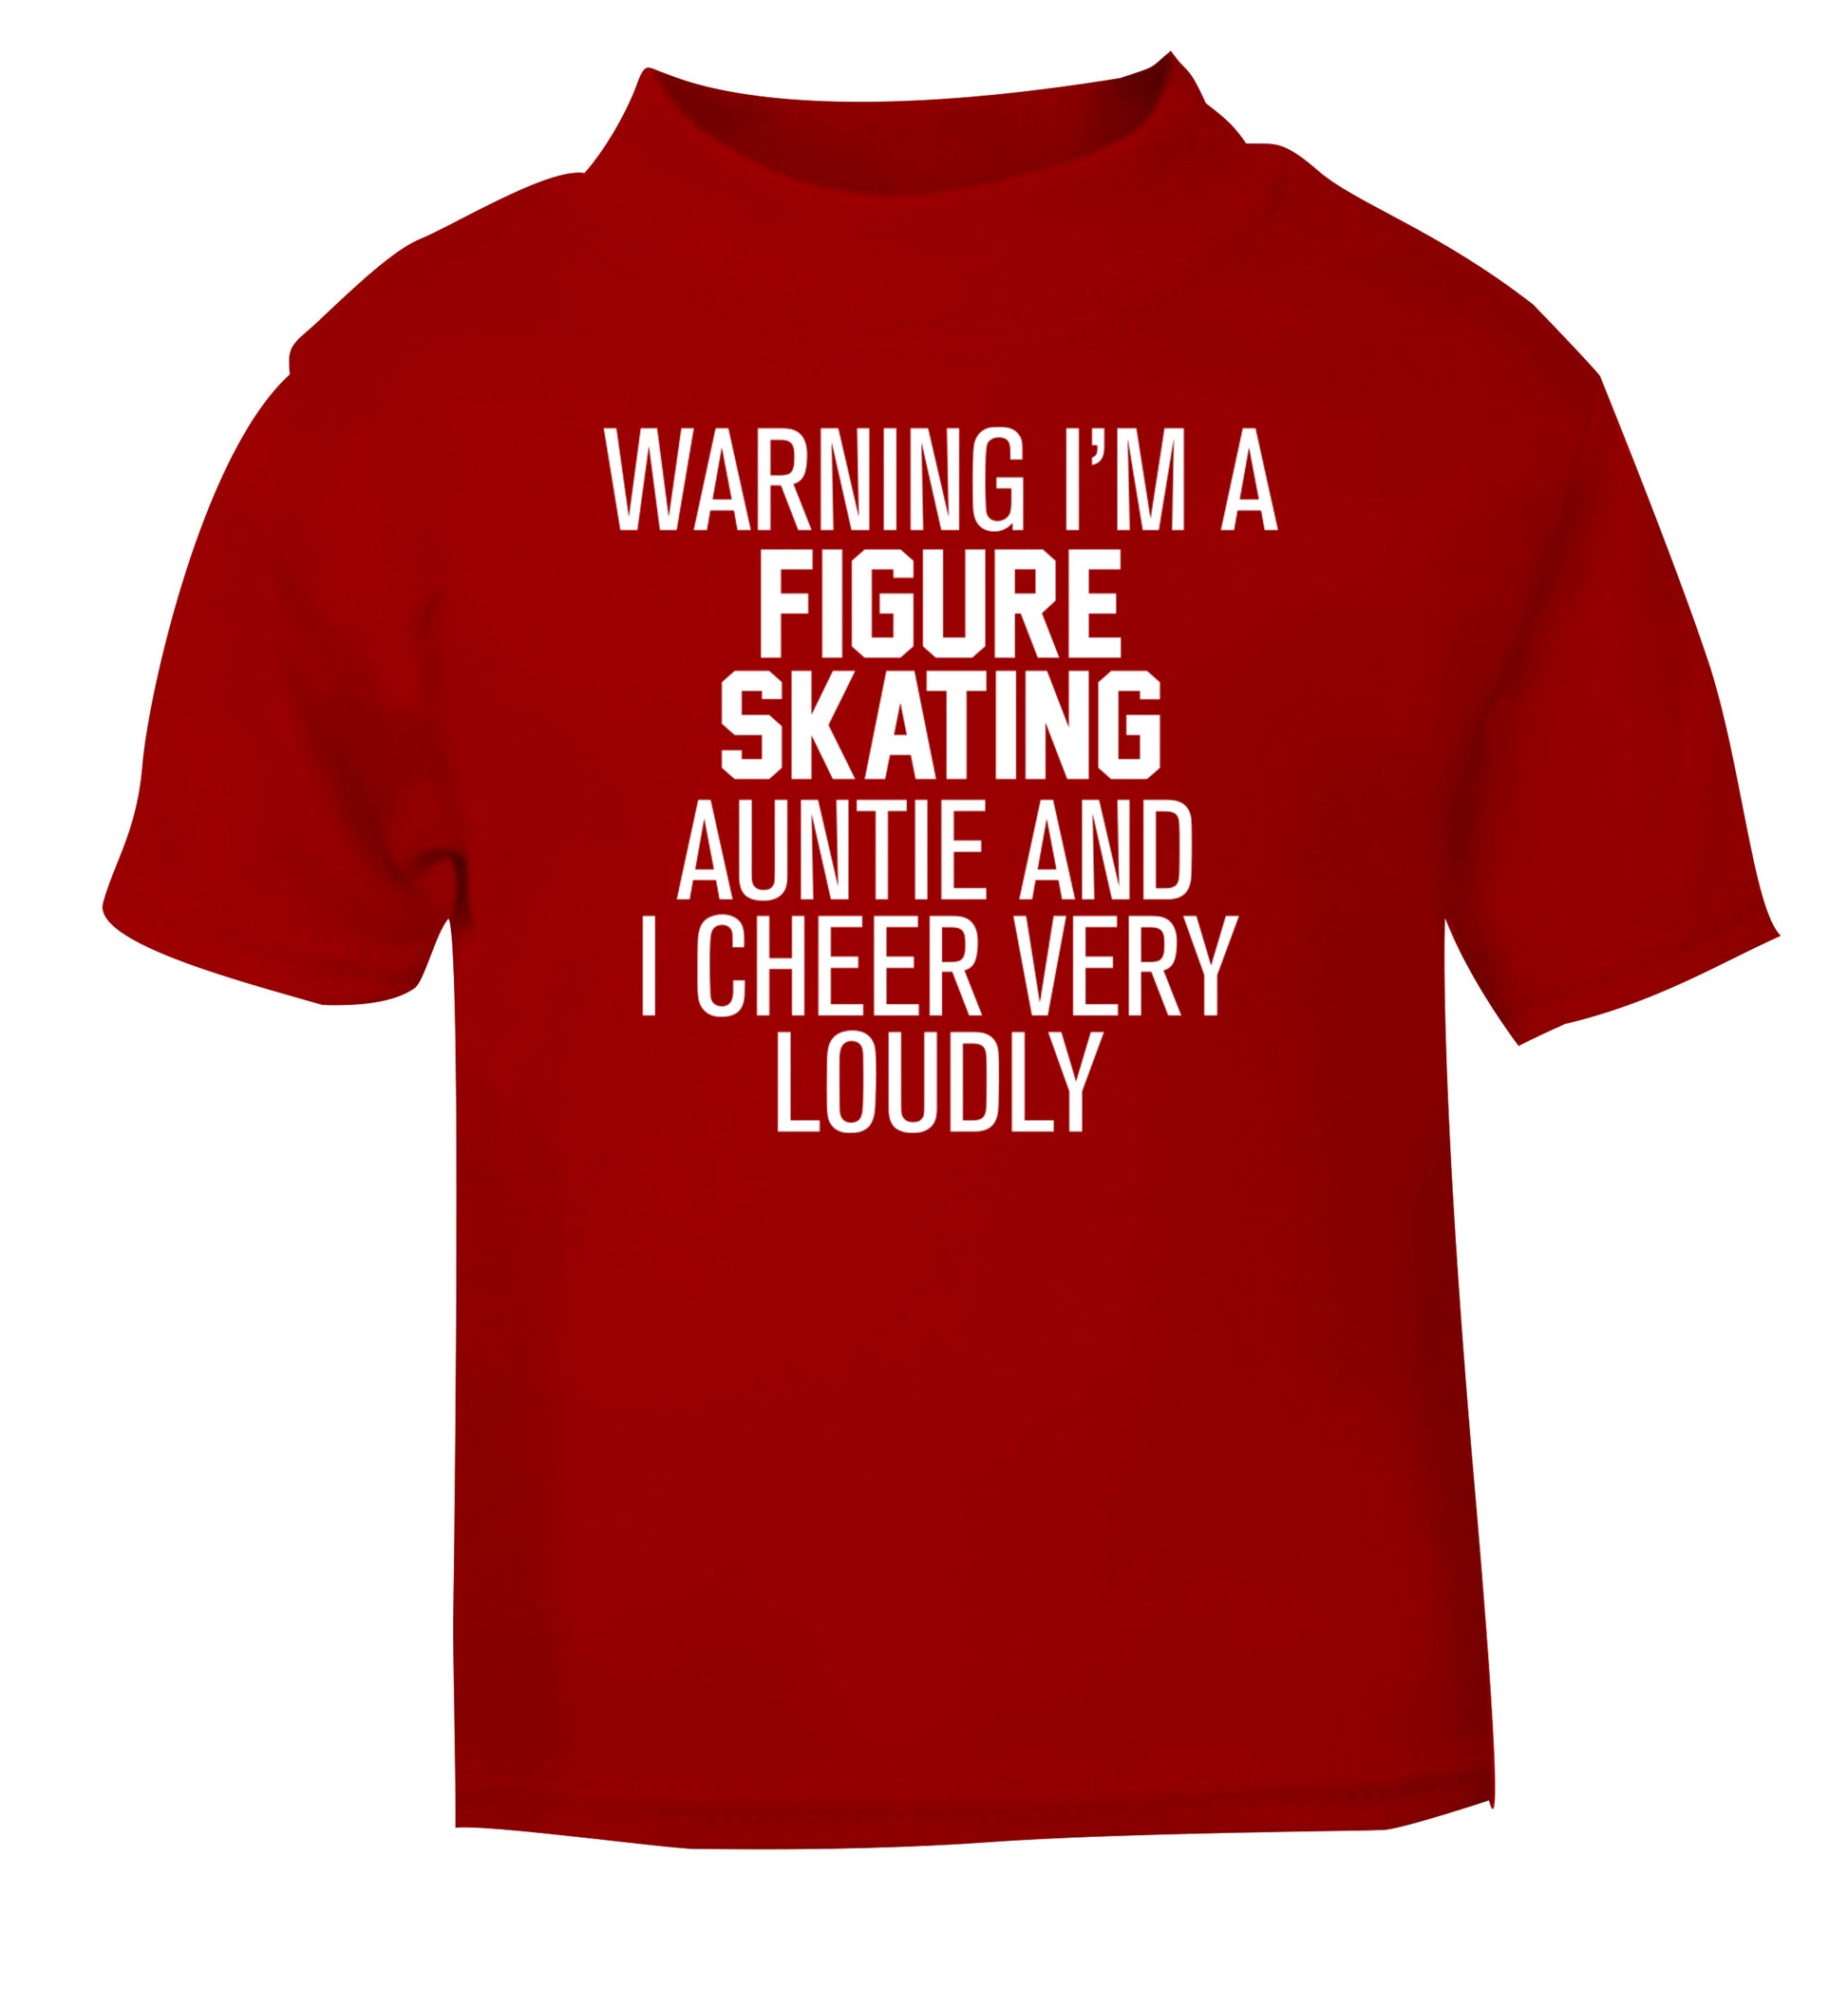 Warning I'm a figure skating auntie and I cheer very loudly red Baby Toddler Tshirt 2 Years